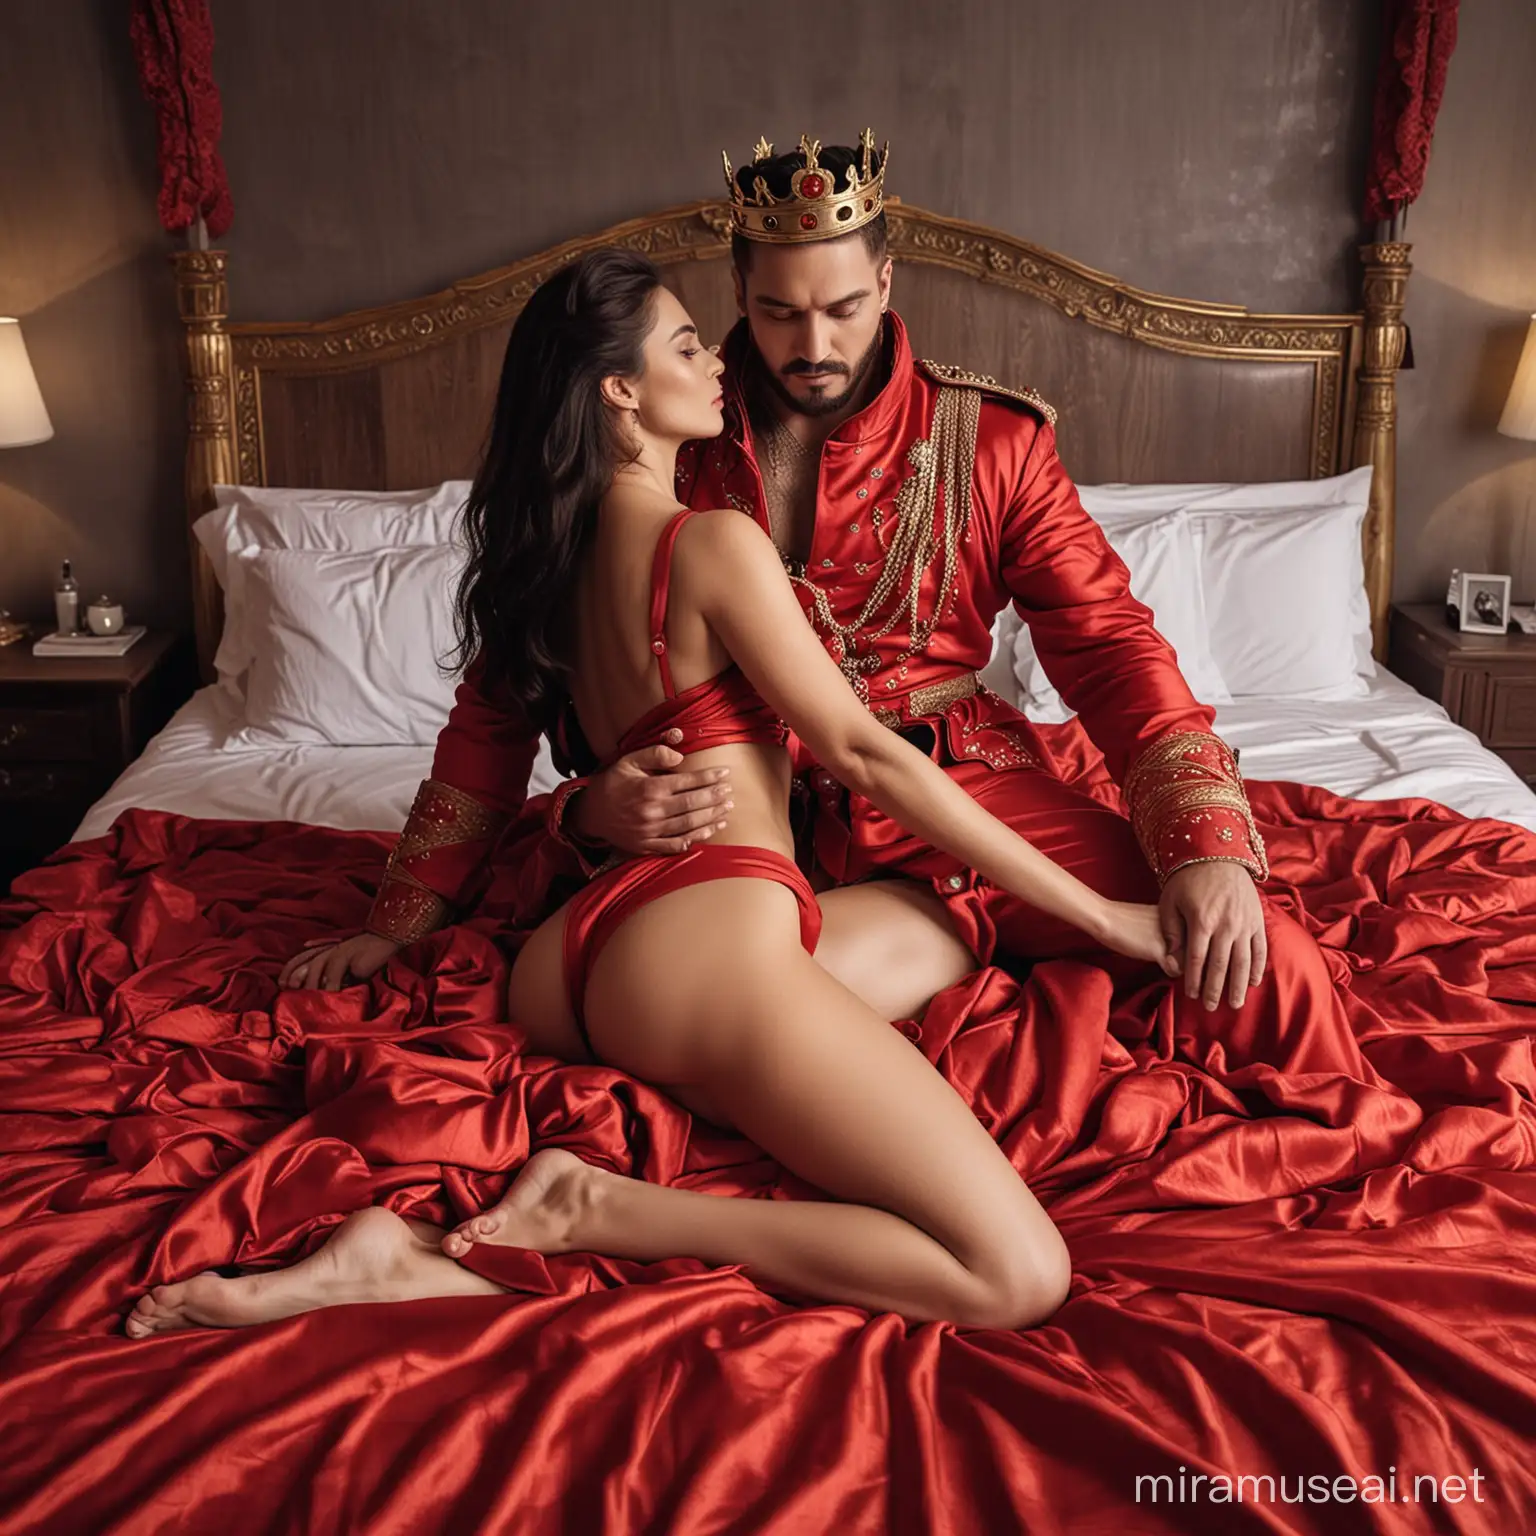 A king wearing war custom and a beautiful woman wearing red clothes doing sex on bed 